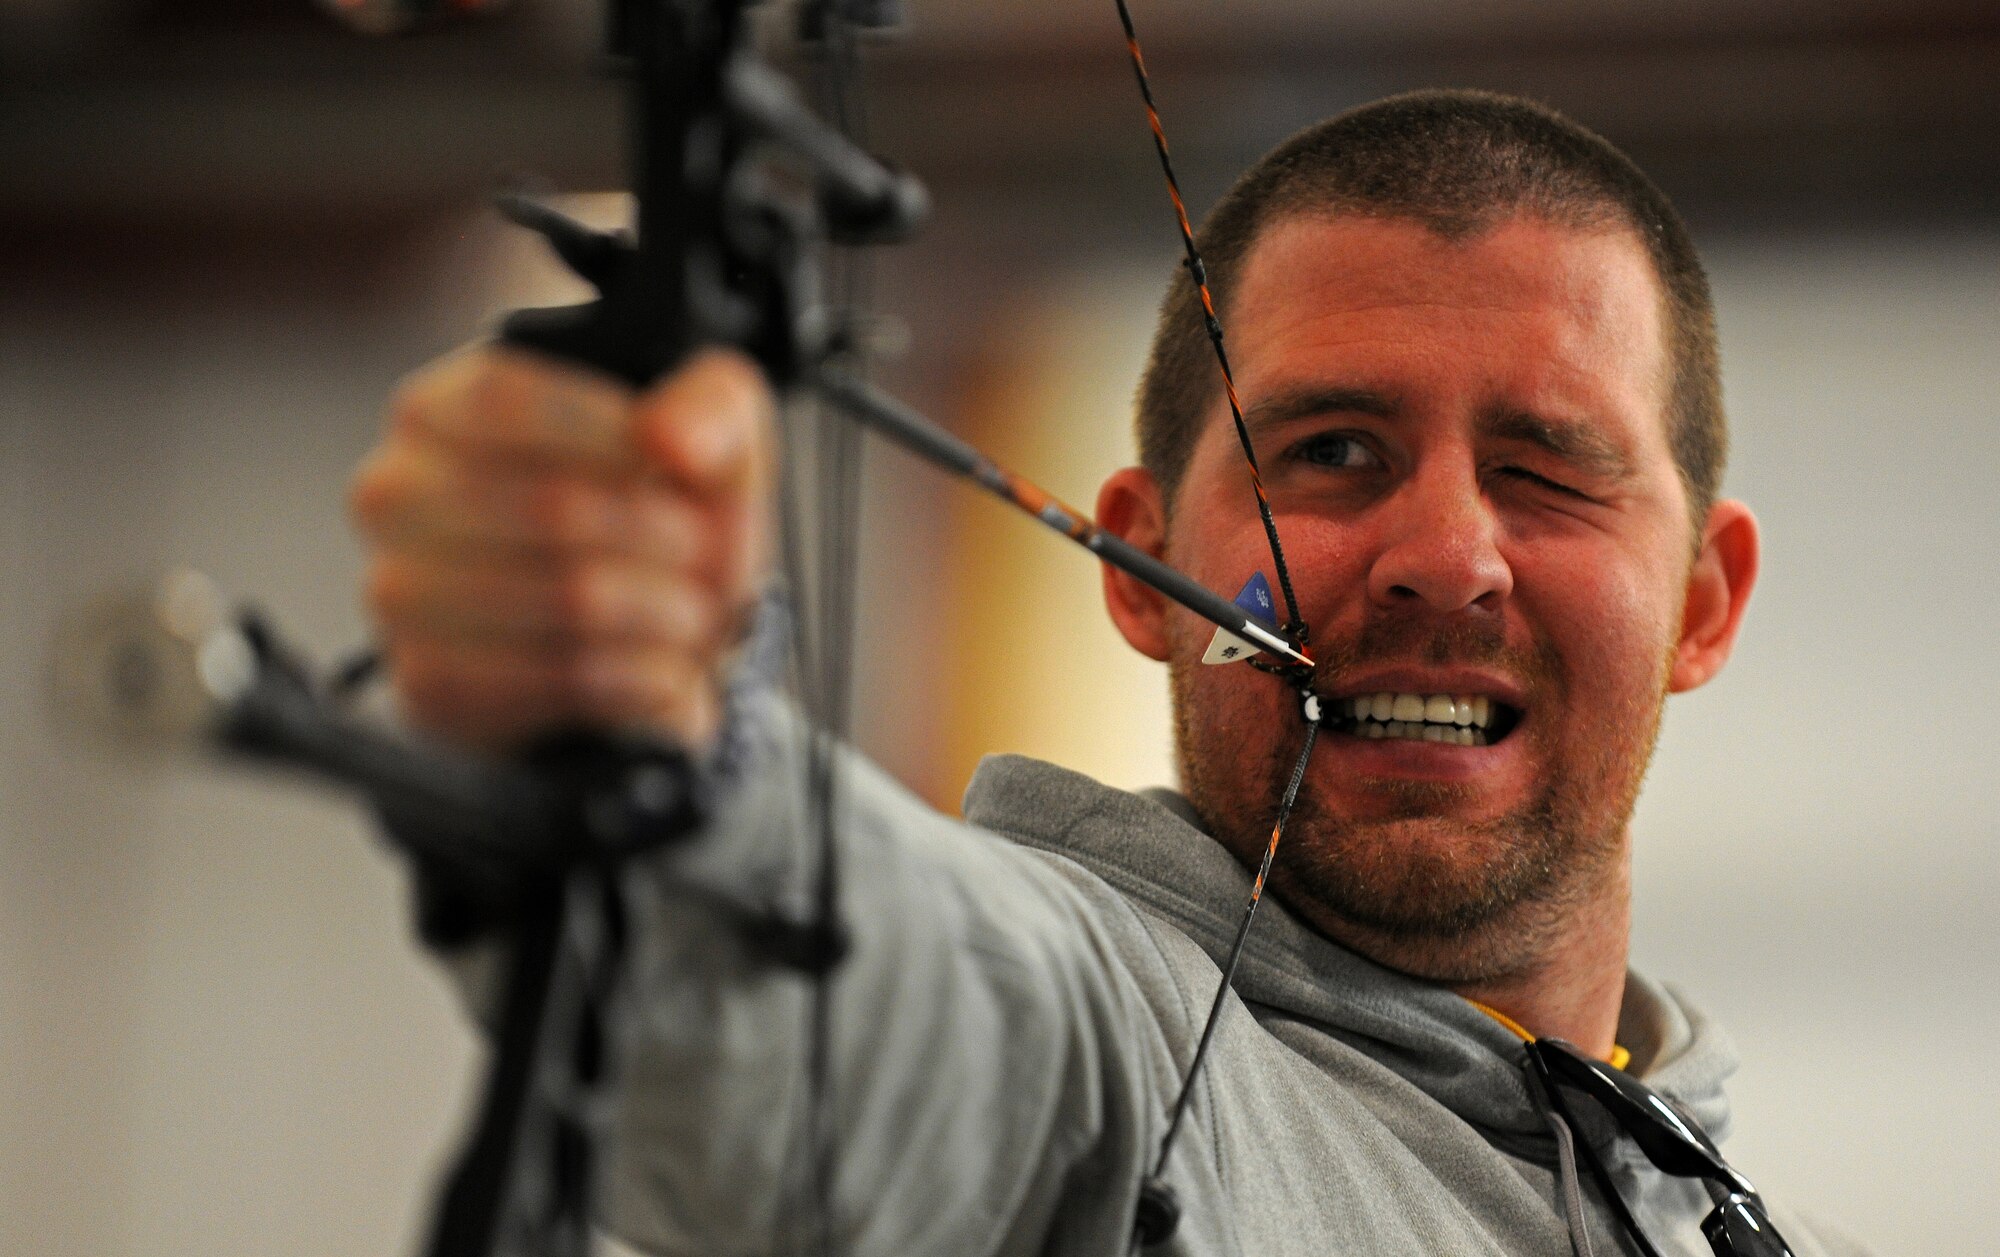 Retired Staff Sgt. Garrett Pope uses a bite tab to pull back the string of a bow as he prepares to fire during the  Northeast Region Warrior CARE Event at Joint Base Andrews, Md., Nov. 17. The event is in conjunction with Warrior Care Month, a month dedicated to honoring the courage, resilience and accomplishments of wounded, ill and injured service members, their families and their caregivers. (U.S. Air Force Photo/Tech. Sgt. Brian Ferguson)